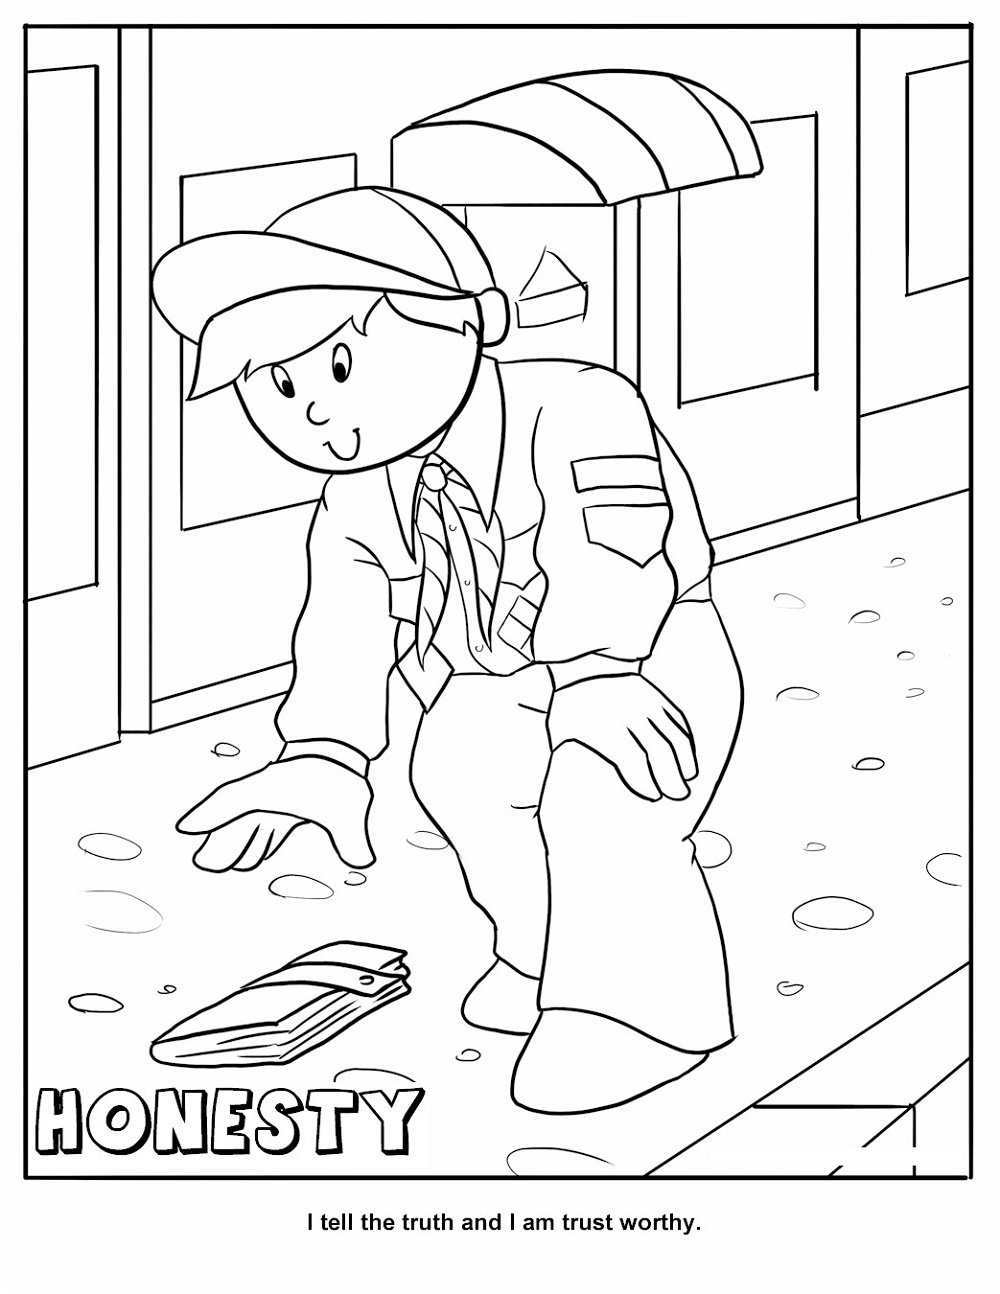 Cub Scout Coloring Pages Honesty